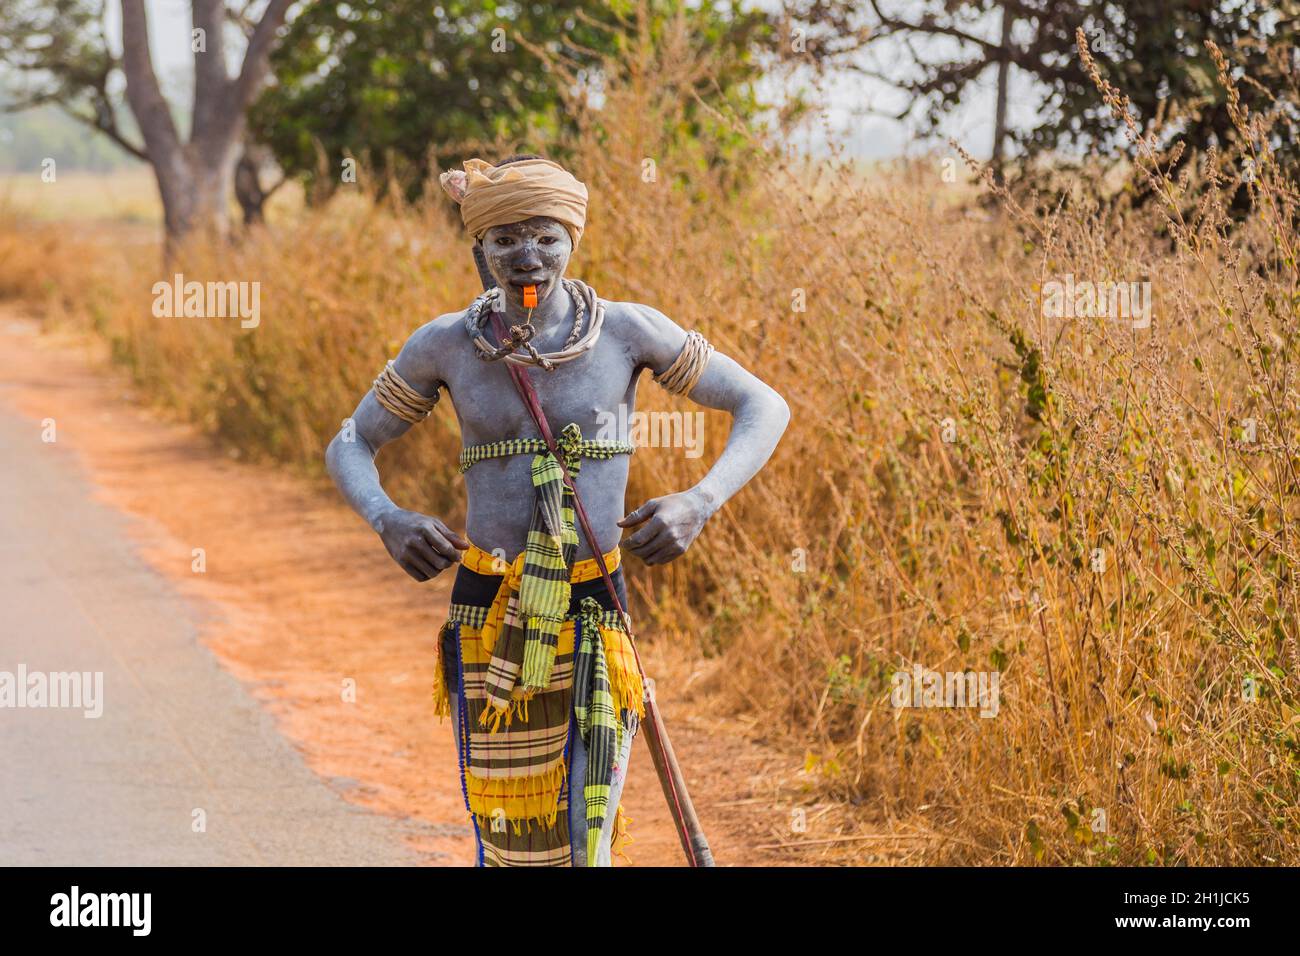 Bissau, Republic of Guinea-Bissau - January 11, 2020: Portrait of a man warrior with traditionally painted face Stock Photo